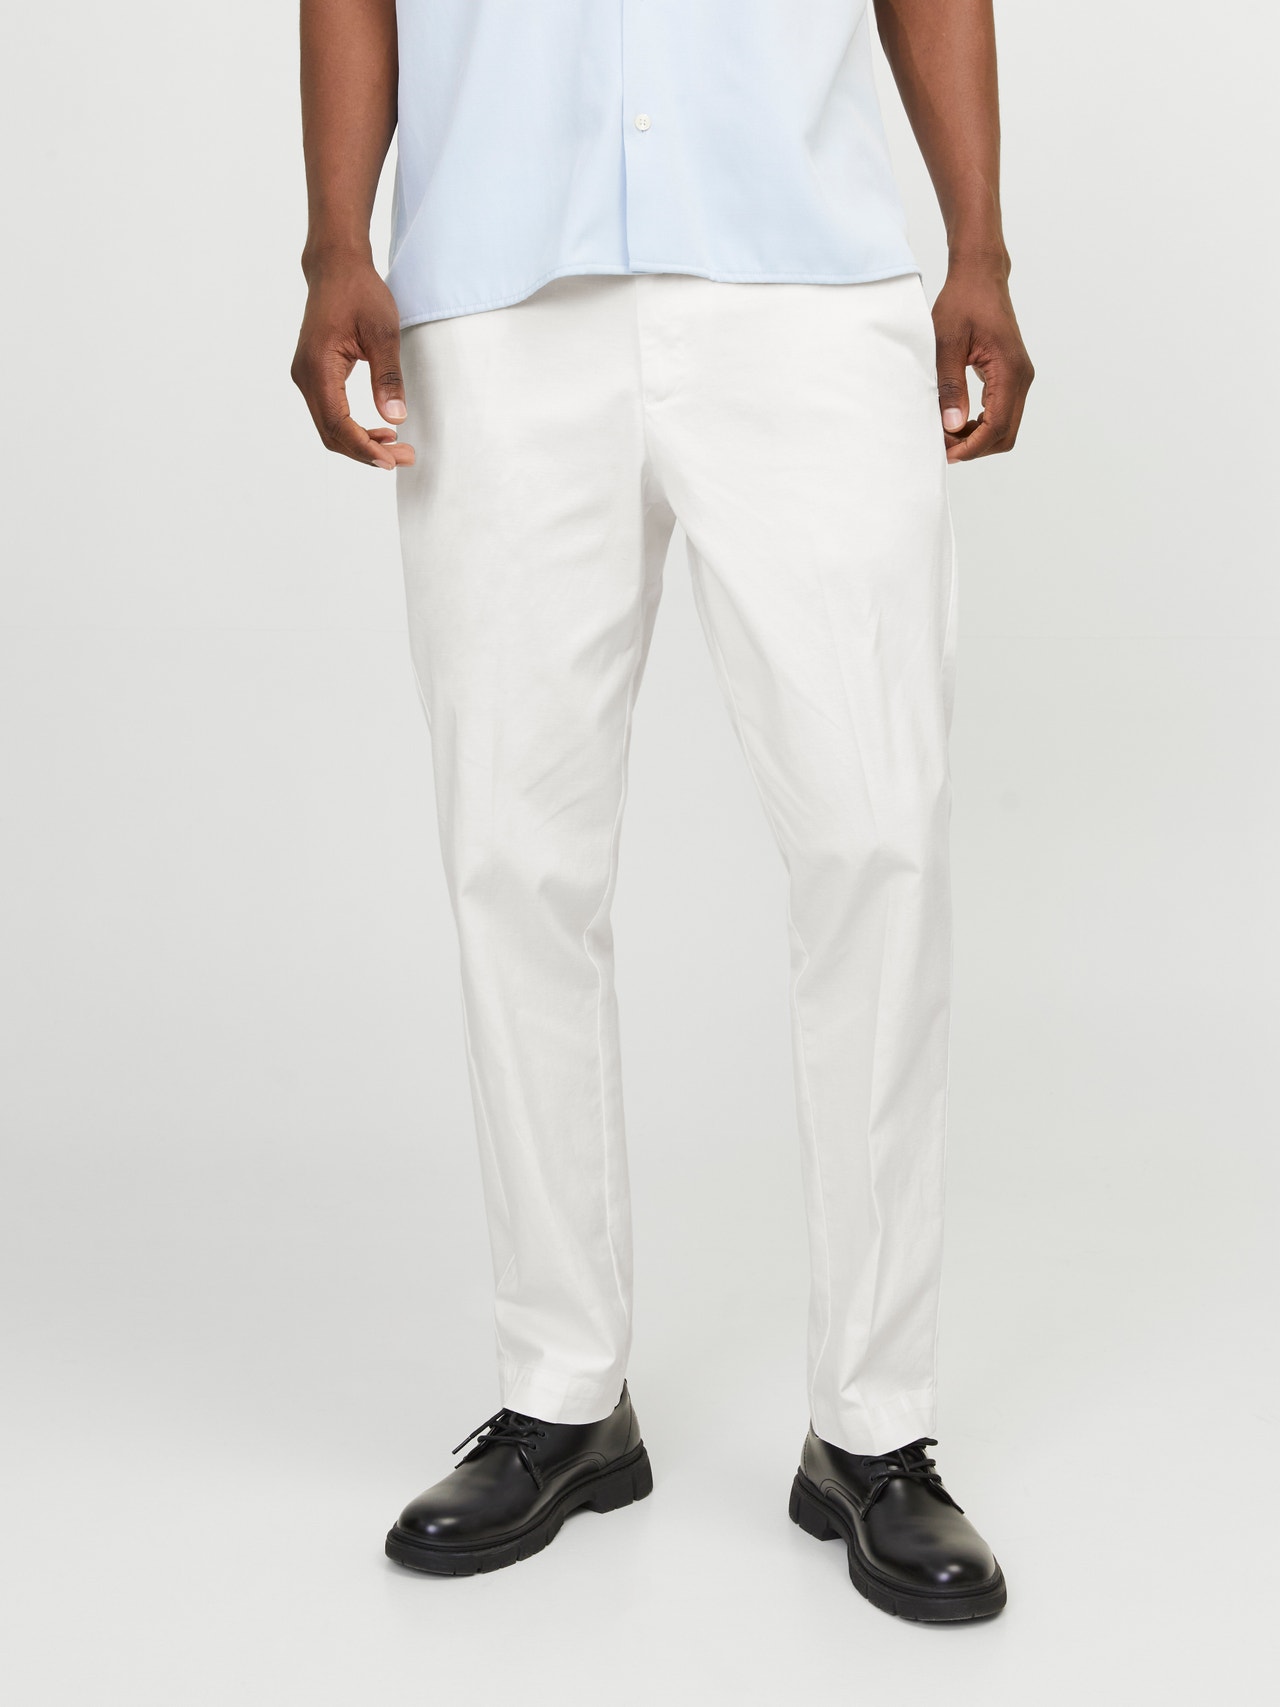 Jack & Jones Relaxed Fit Chino trousers -Bright White - 12255441